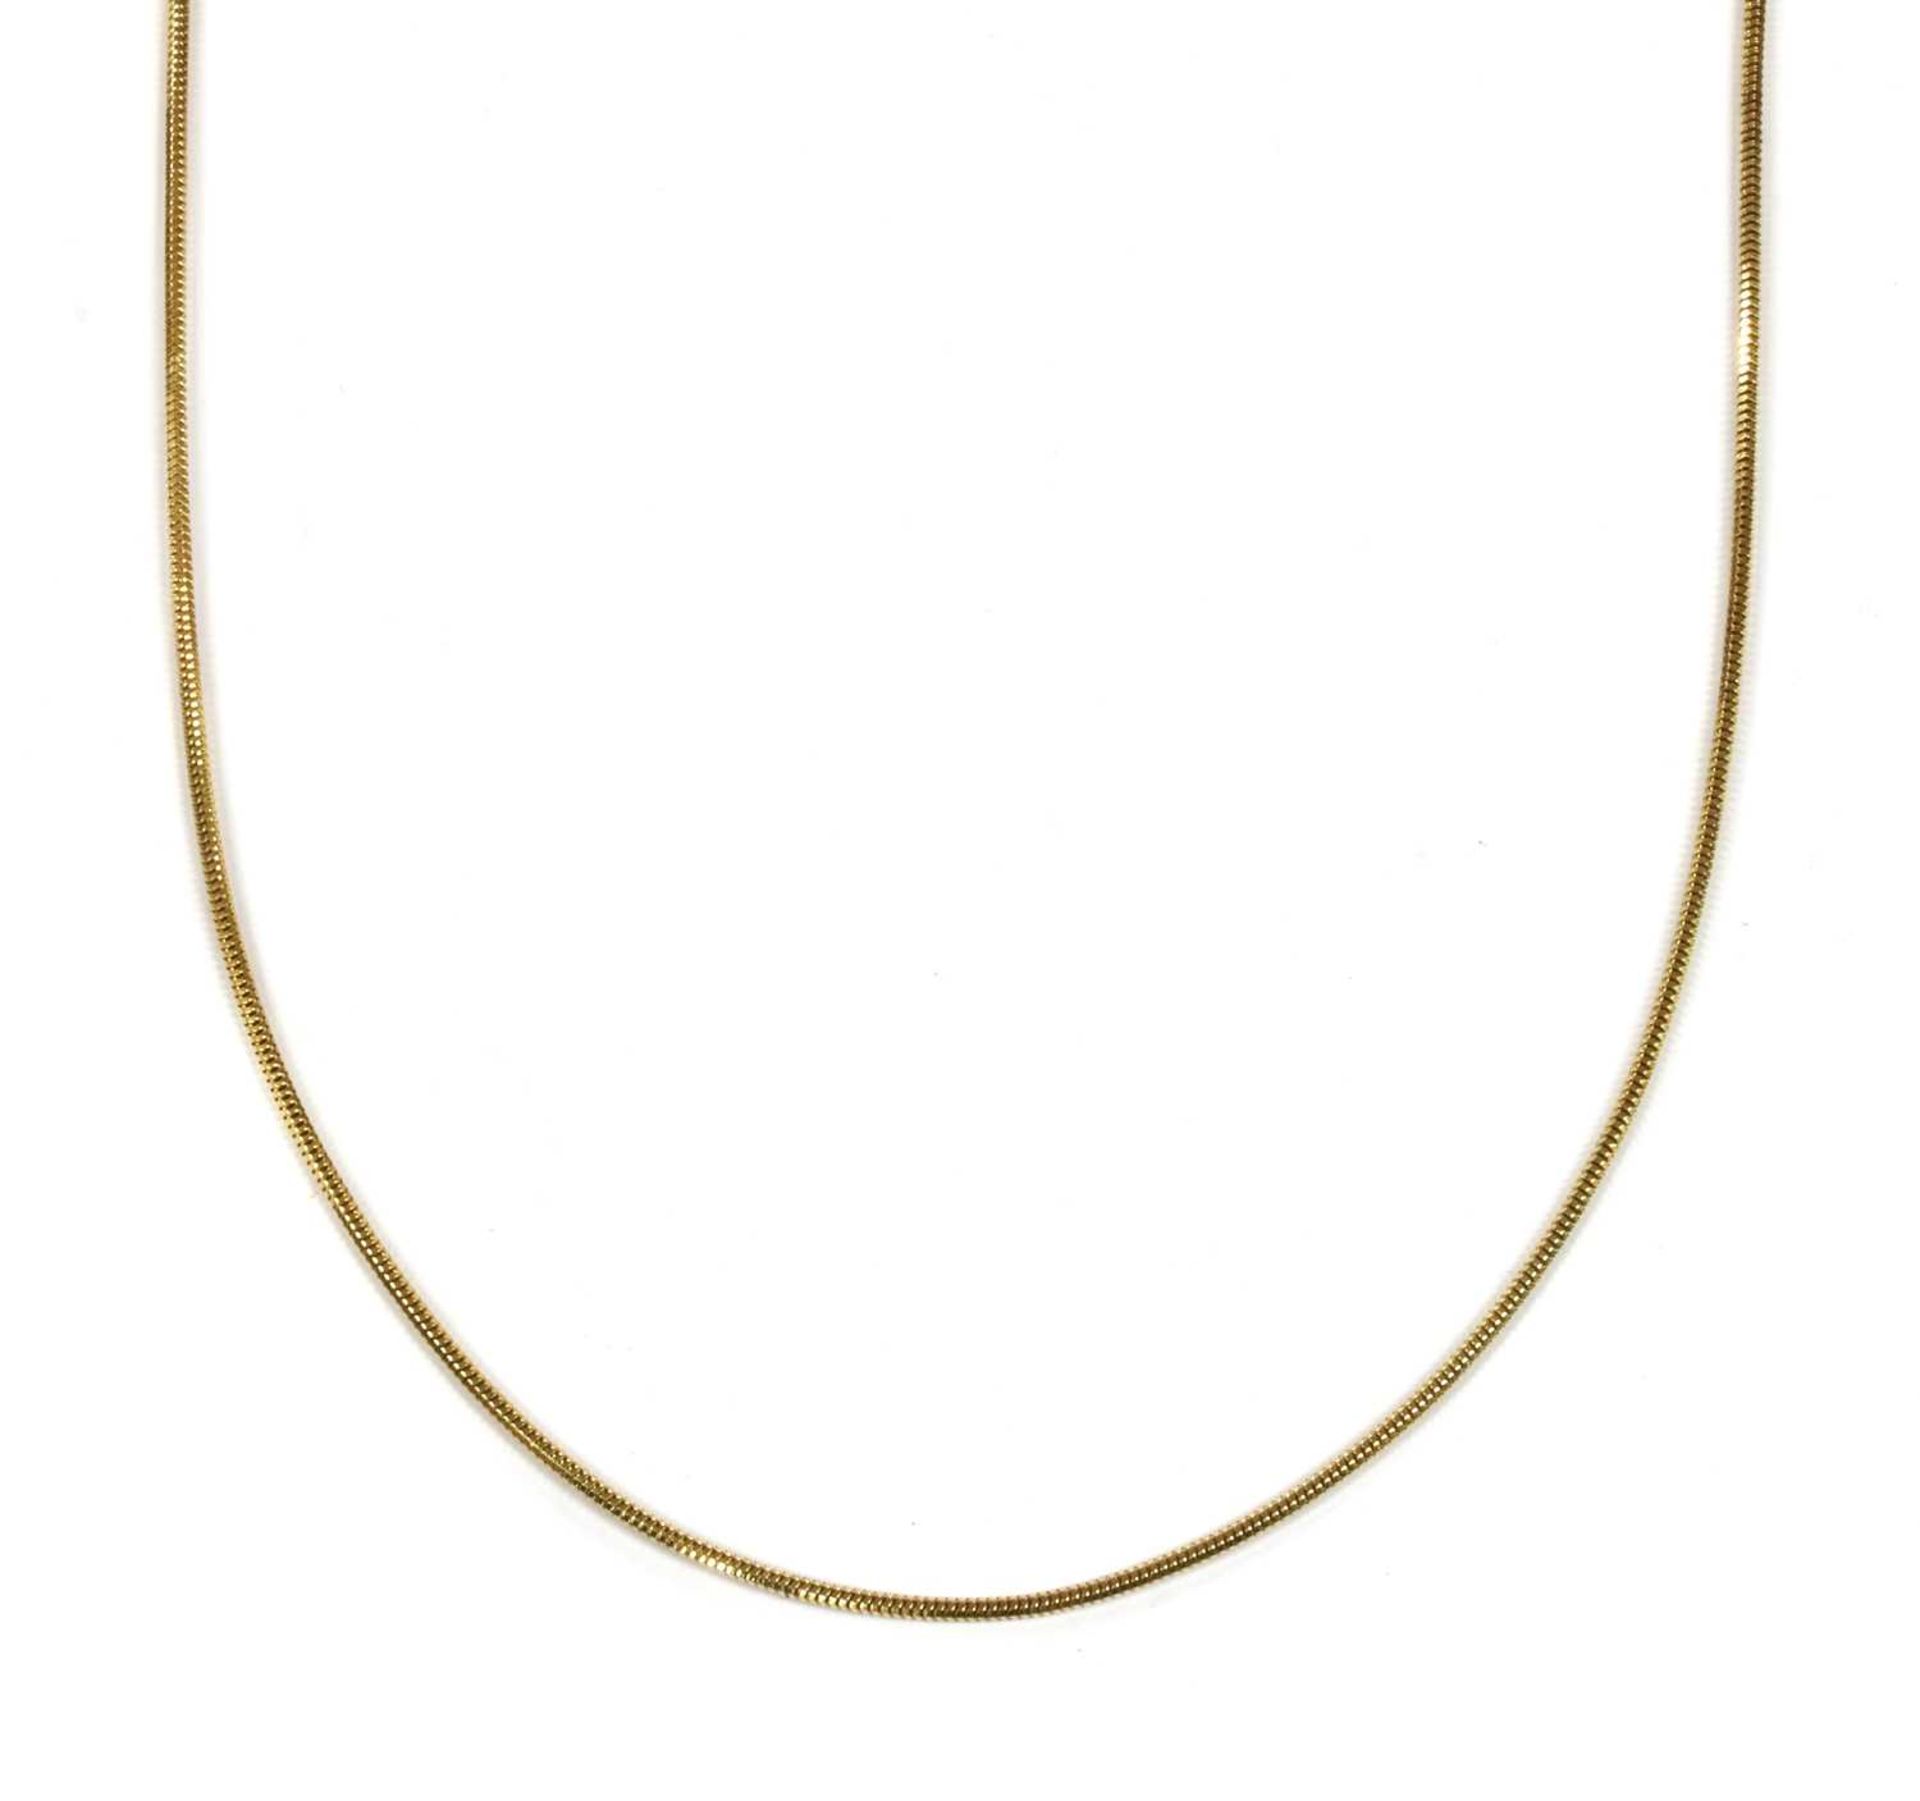 An 18ct gold snake chain,